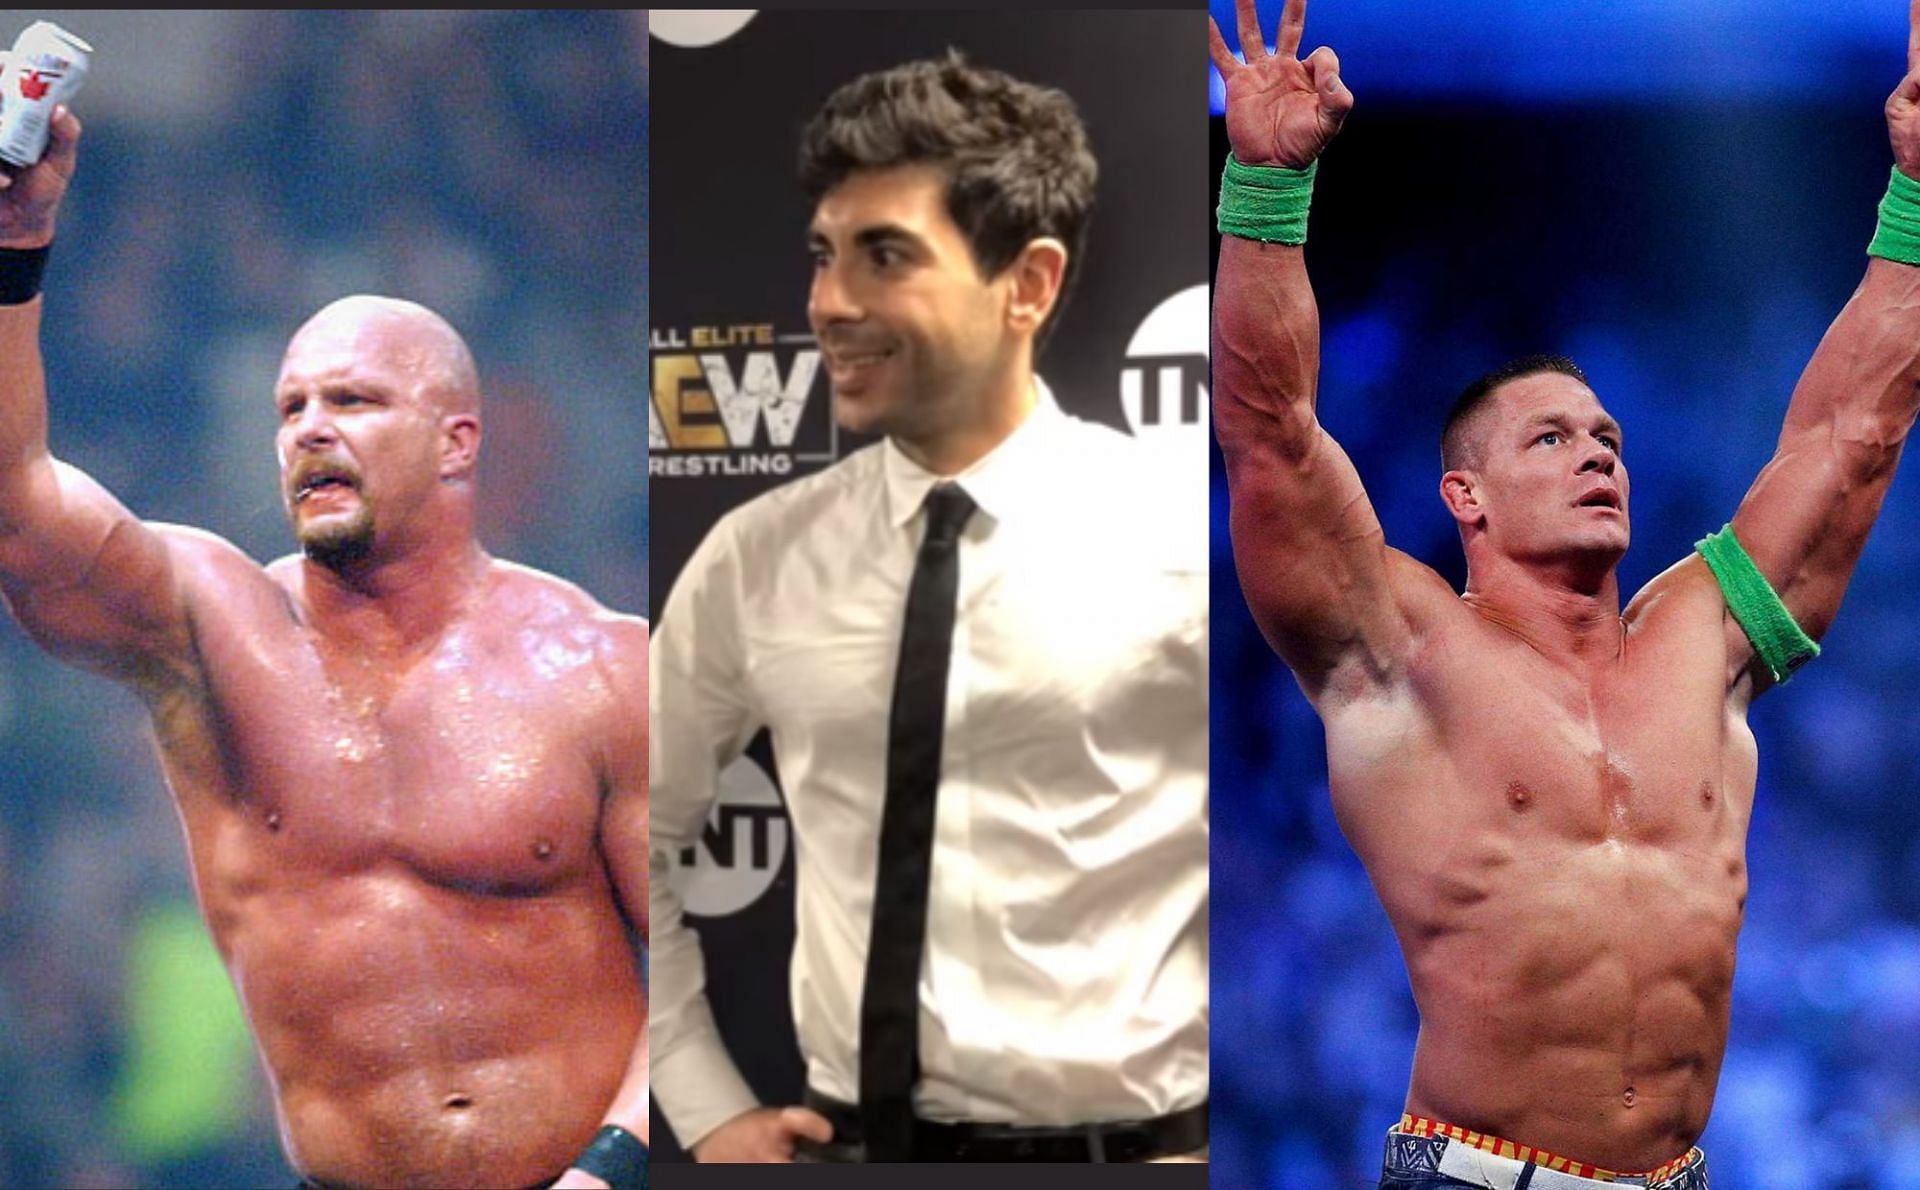 AEW fans will probably never see some of these legends in their arena